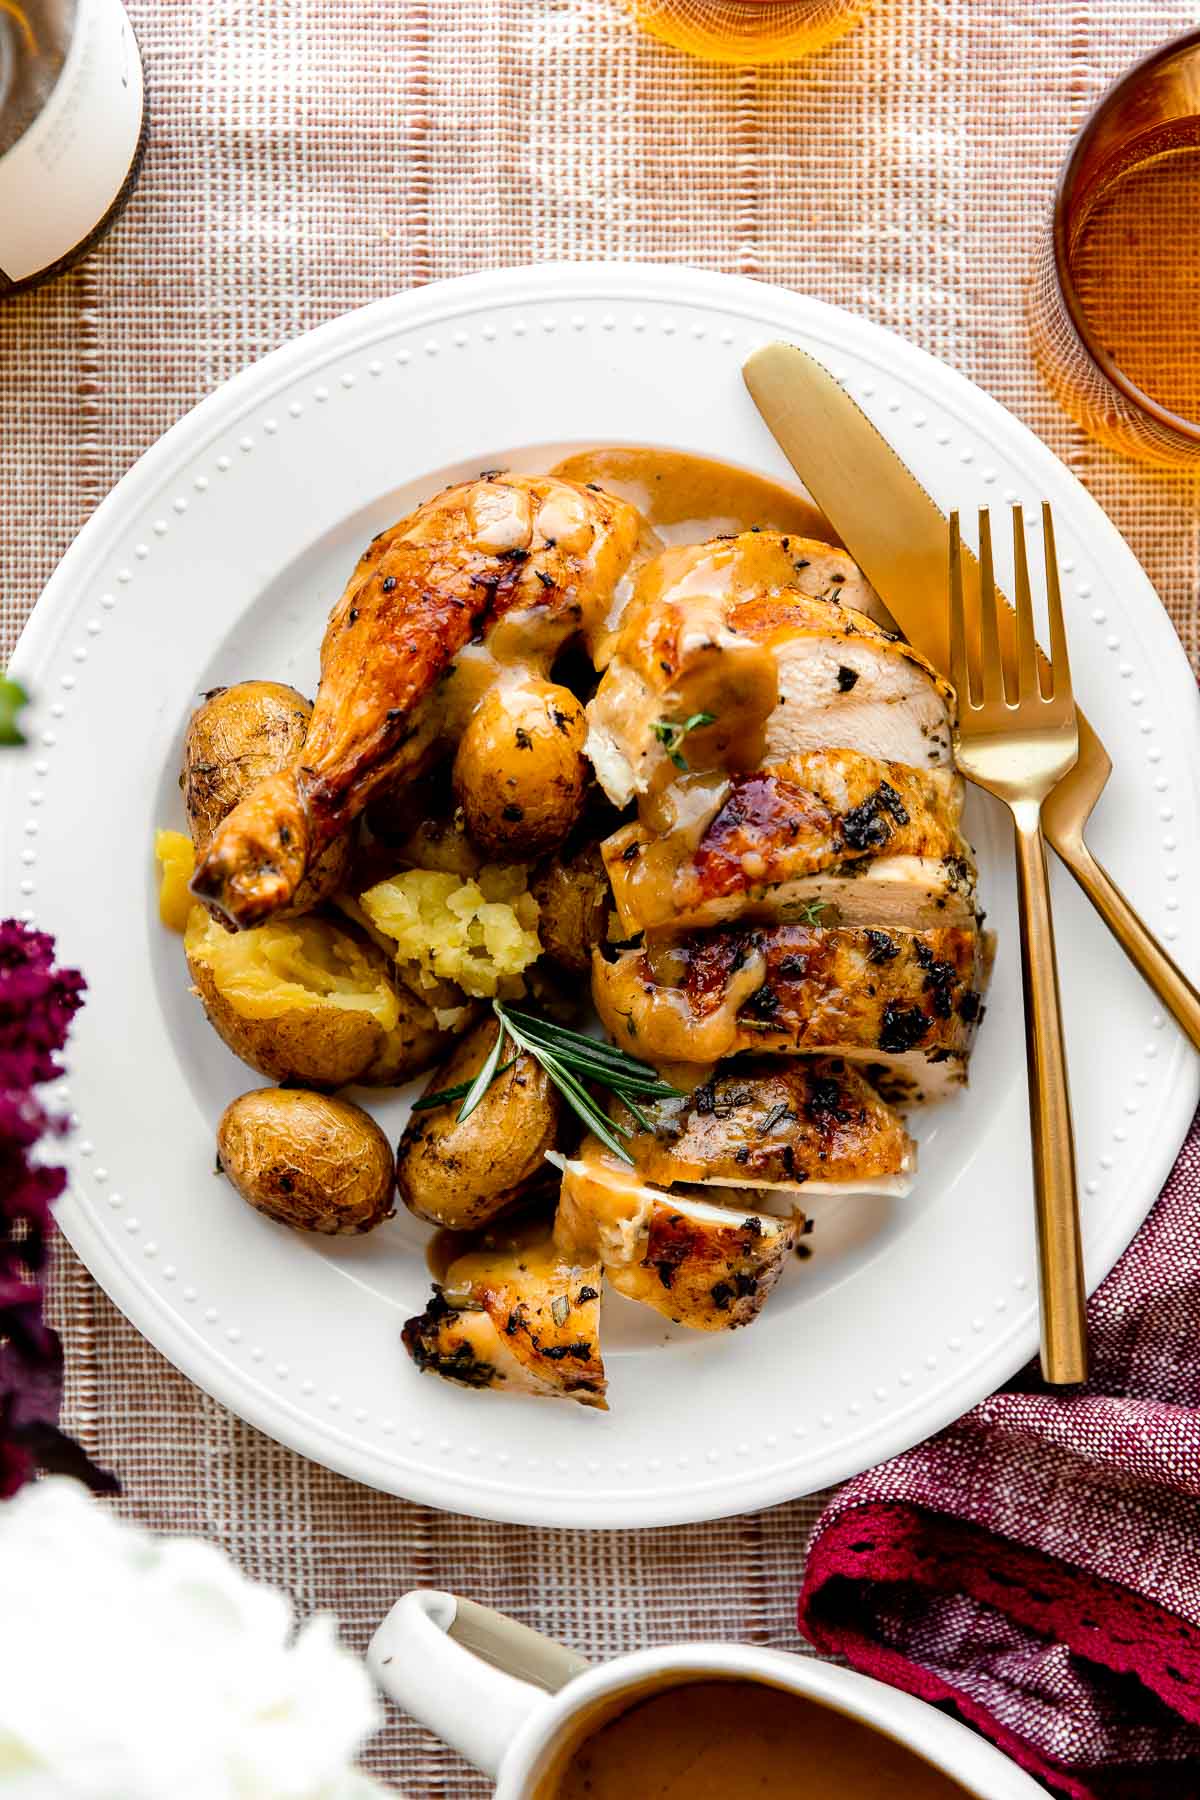 An overhead shot of Thanksgiving chicken served atop a white dinner plate that sits atop a muted red table cloth with a gold fork & knife resting atop of the plate. The oven roasted chicken is served with potatoes, chicken gravy and is garnished with fresh herbs. The plate is surrounded by a bottle of wine, purple florals, a purple linen napkin, two amber colored drinking glass, and a white gravy boat filled with chicken gravy.